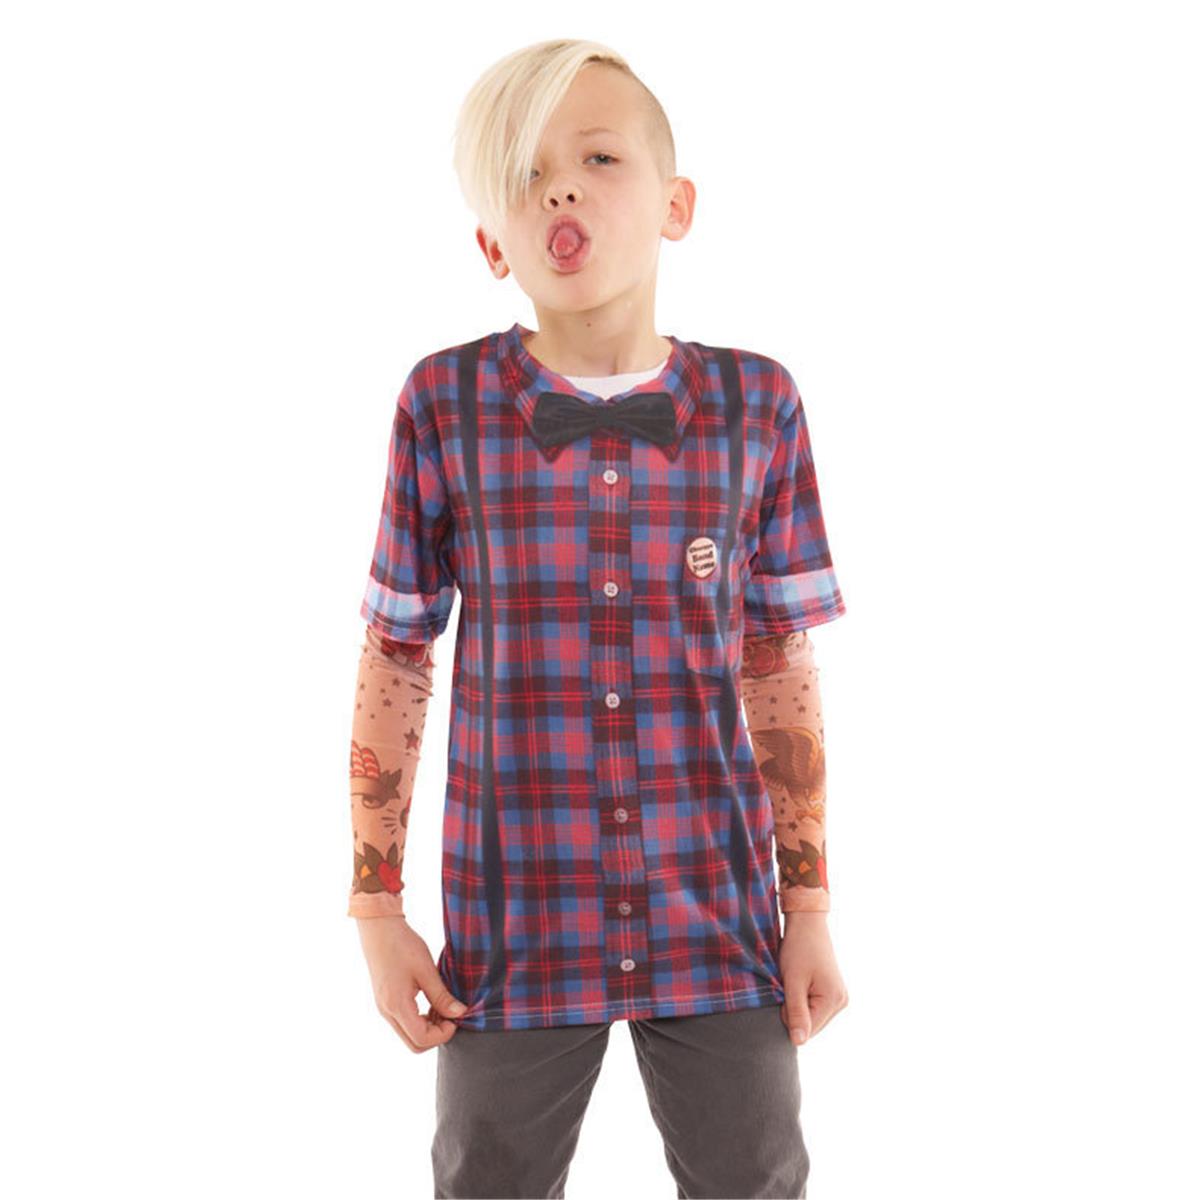 F134202-m Youth Hipster Bow Tie & Suspenders Tattoo Tee With Mesh Sleeves - Medium